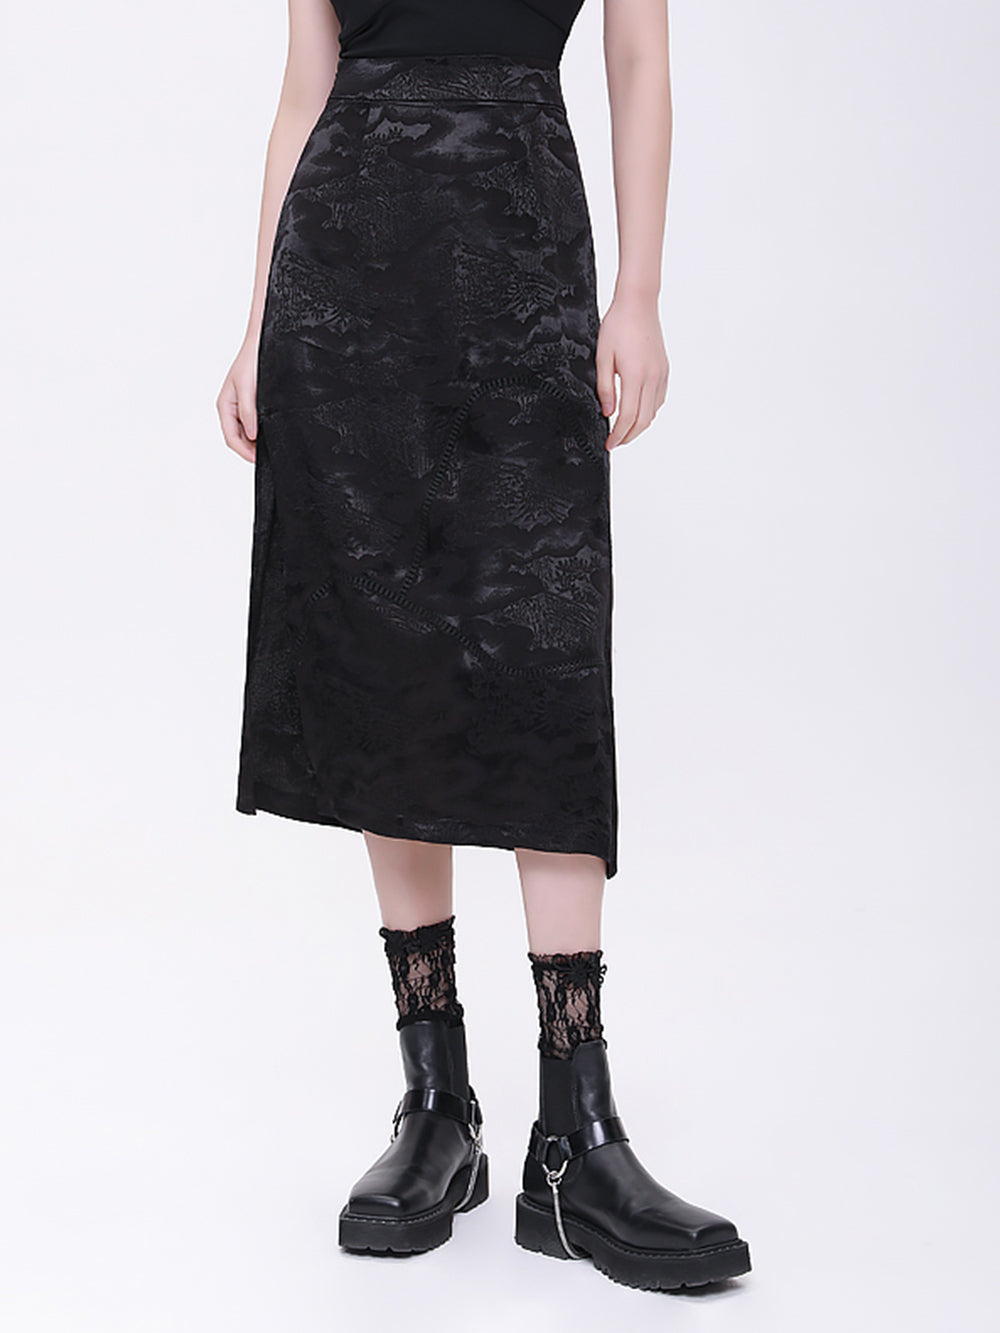 MUKTANK×CUUDICLAB Silk Hollowed-out Skirts